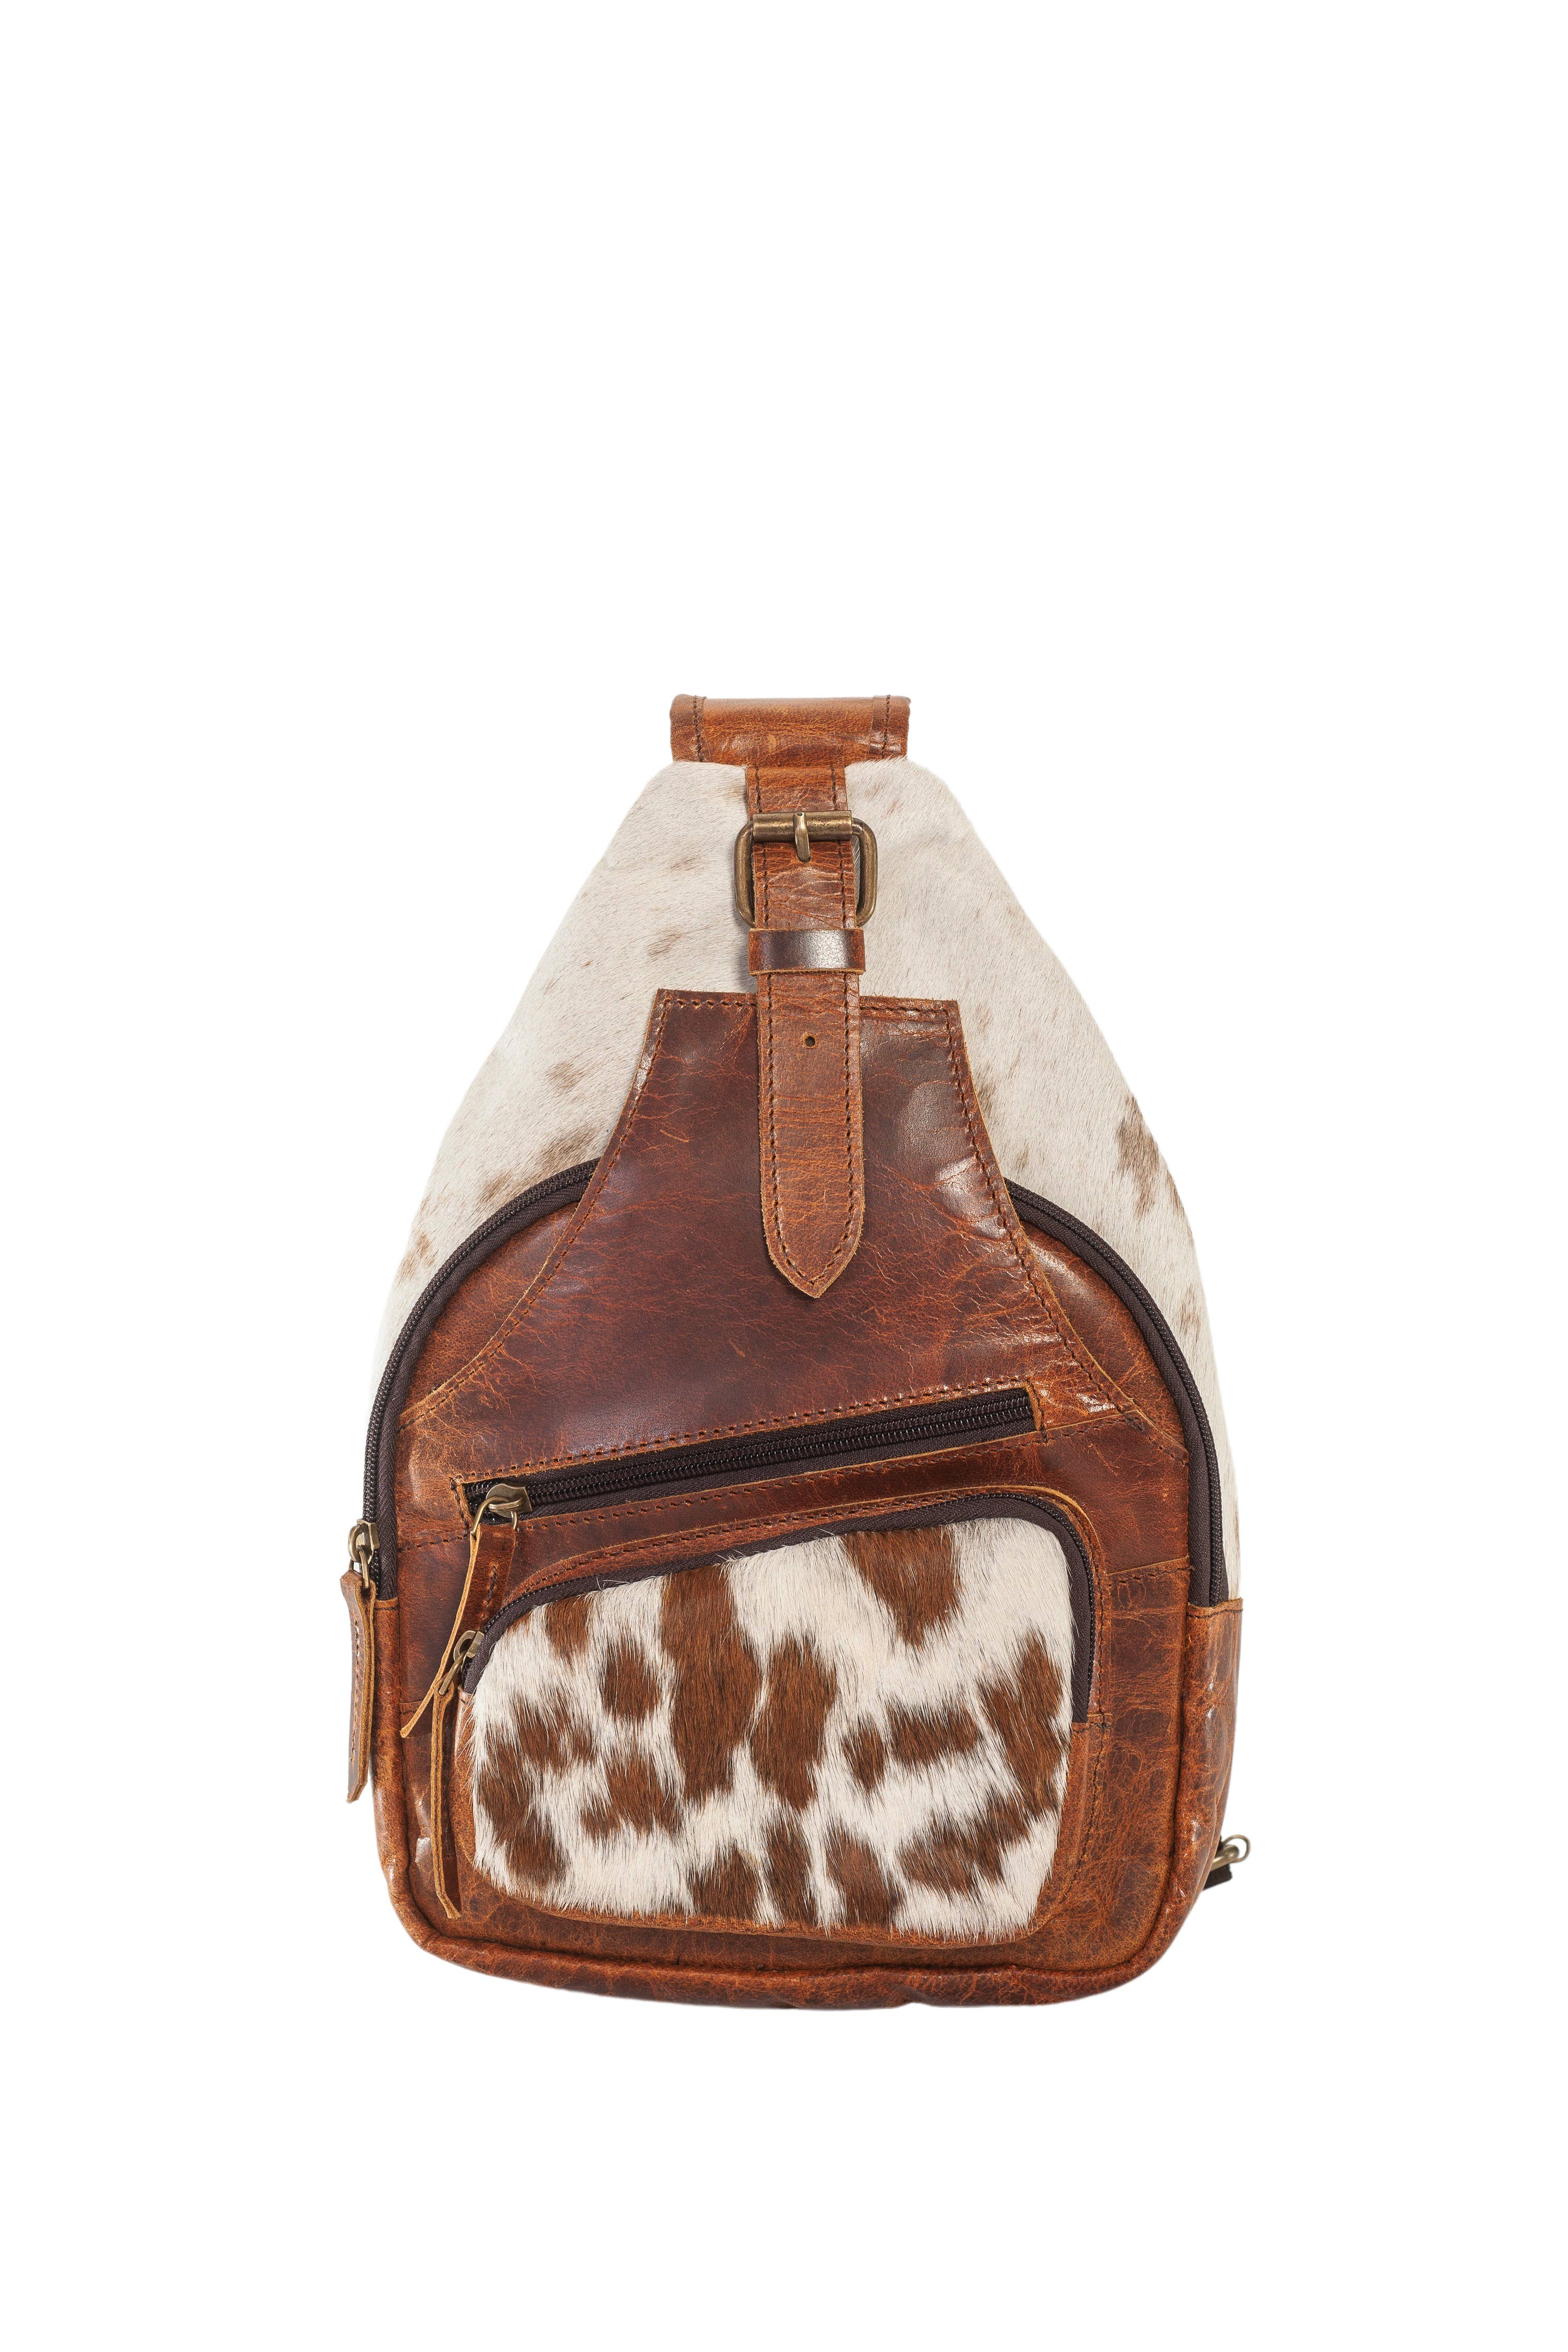 Buy COWHIDE PURSE, Hair on Hide Bag, BLACK and White Bag, Cowhide Leather  Bag, Pony Hair Bag, Cowhide Tote, Cowgirl Purse, Cowhide Bag. Texas Online  in India - Etsy